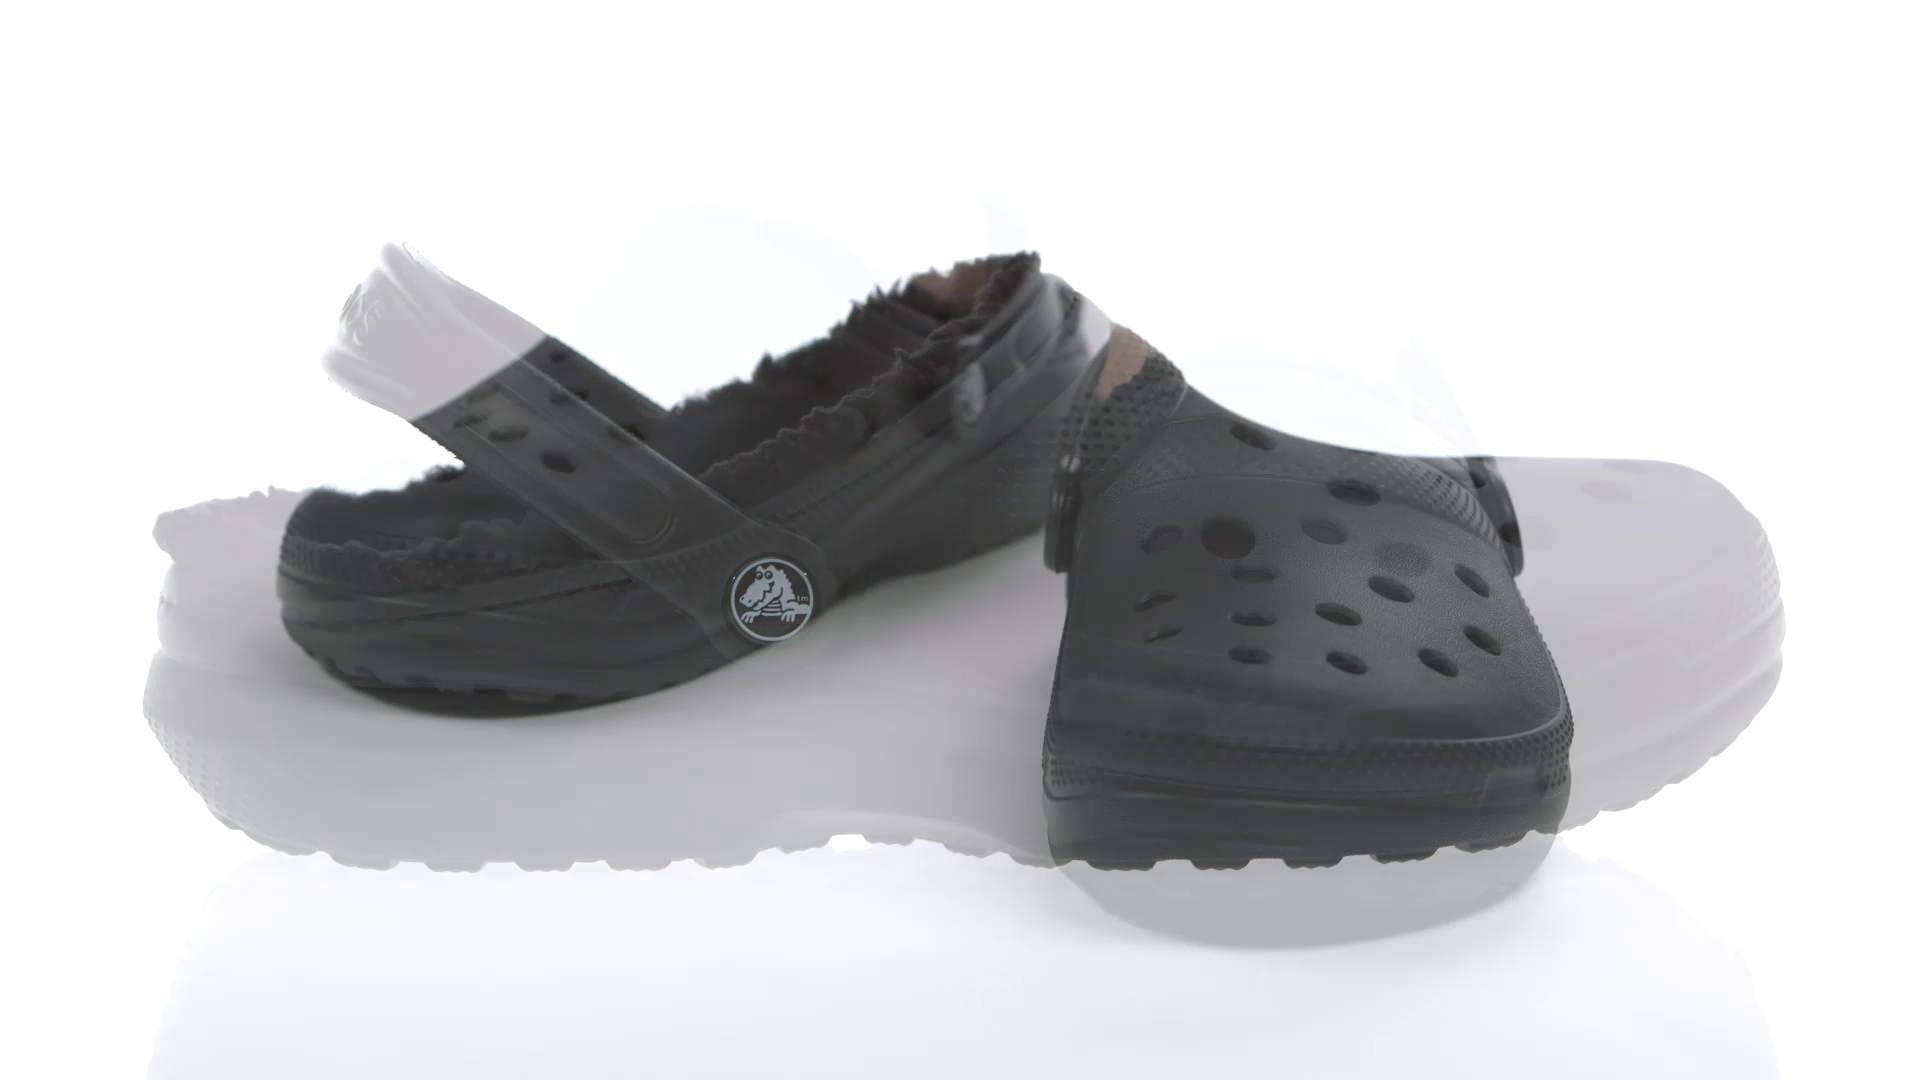 A Collection Of Trendy Crocs Footwear